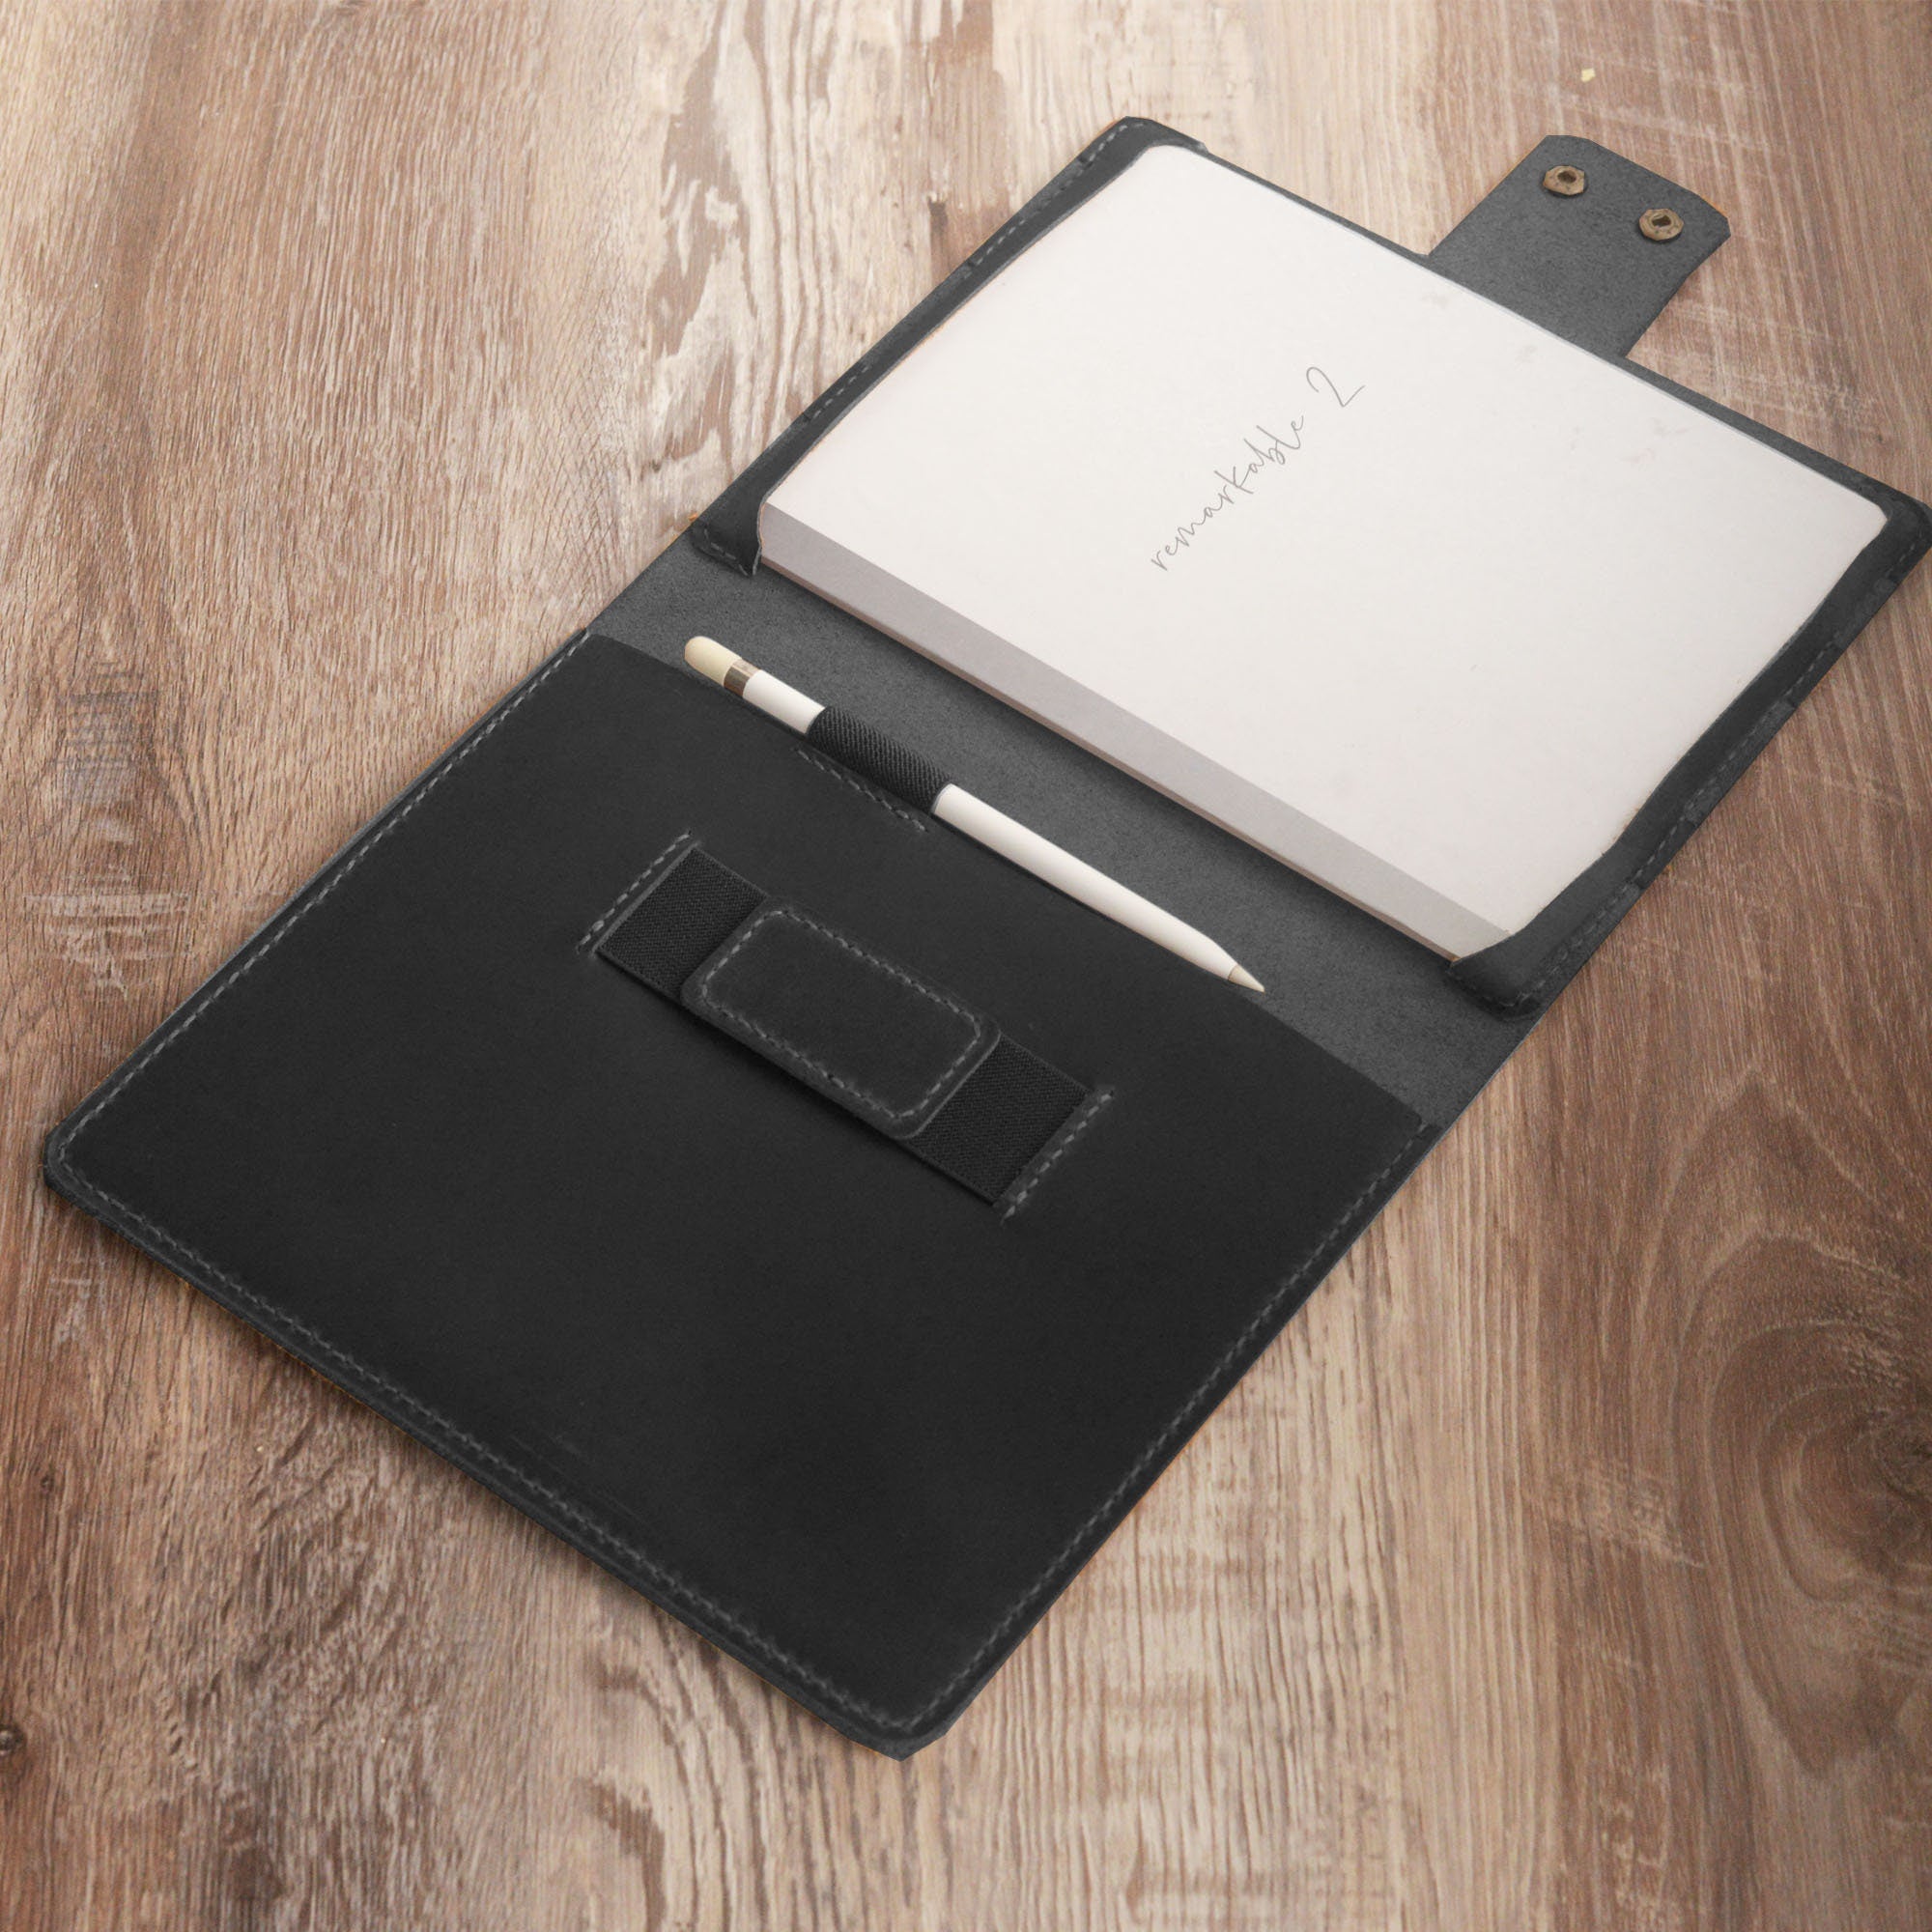 The reMarkable 2 - A Beautiful Paper-Like Tablet To Help You Focus